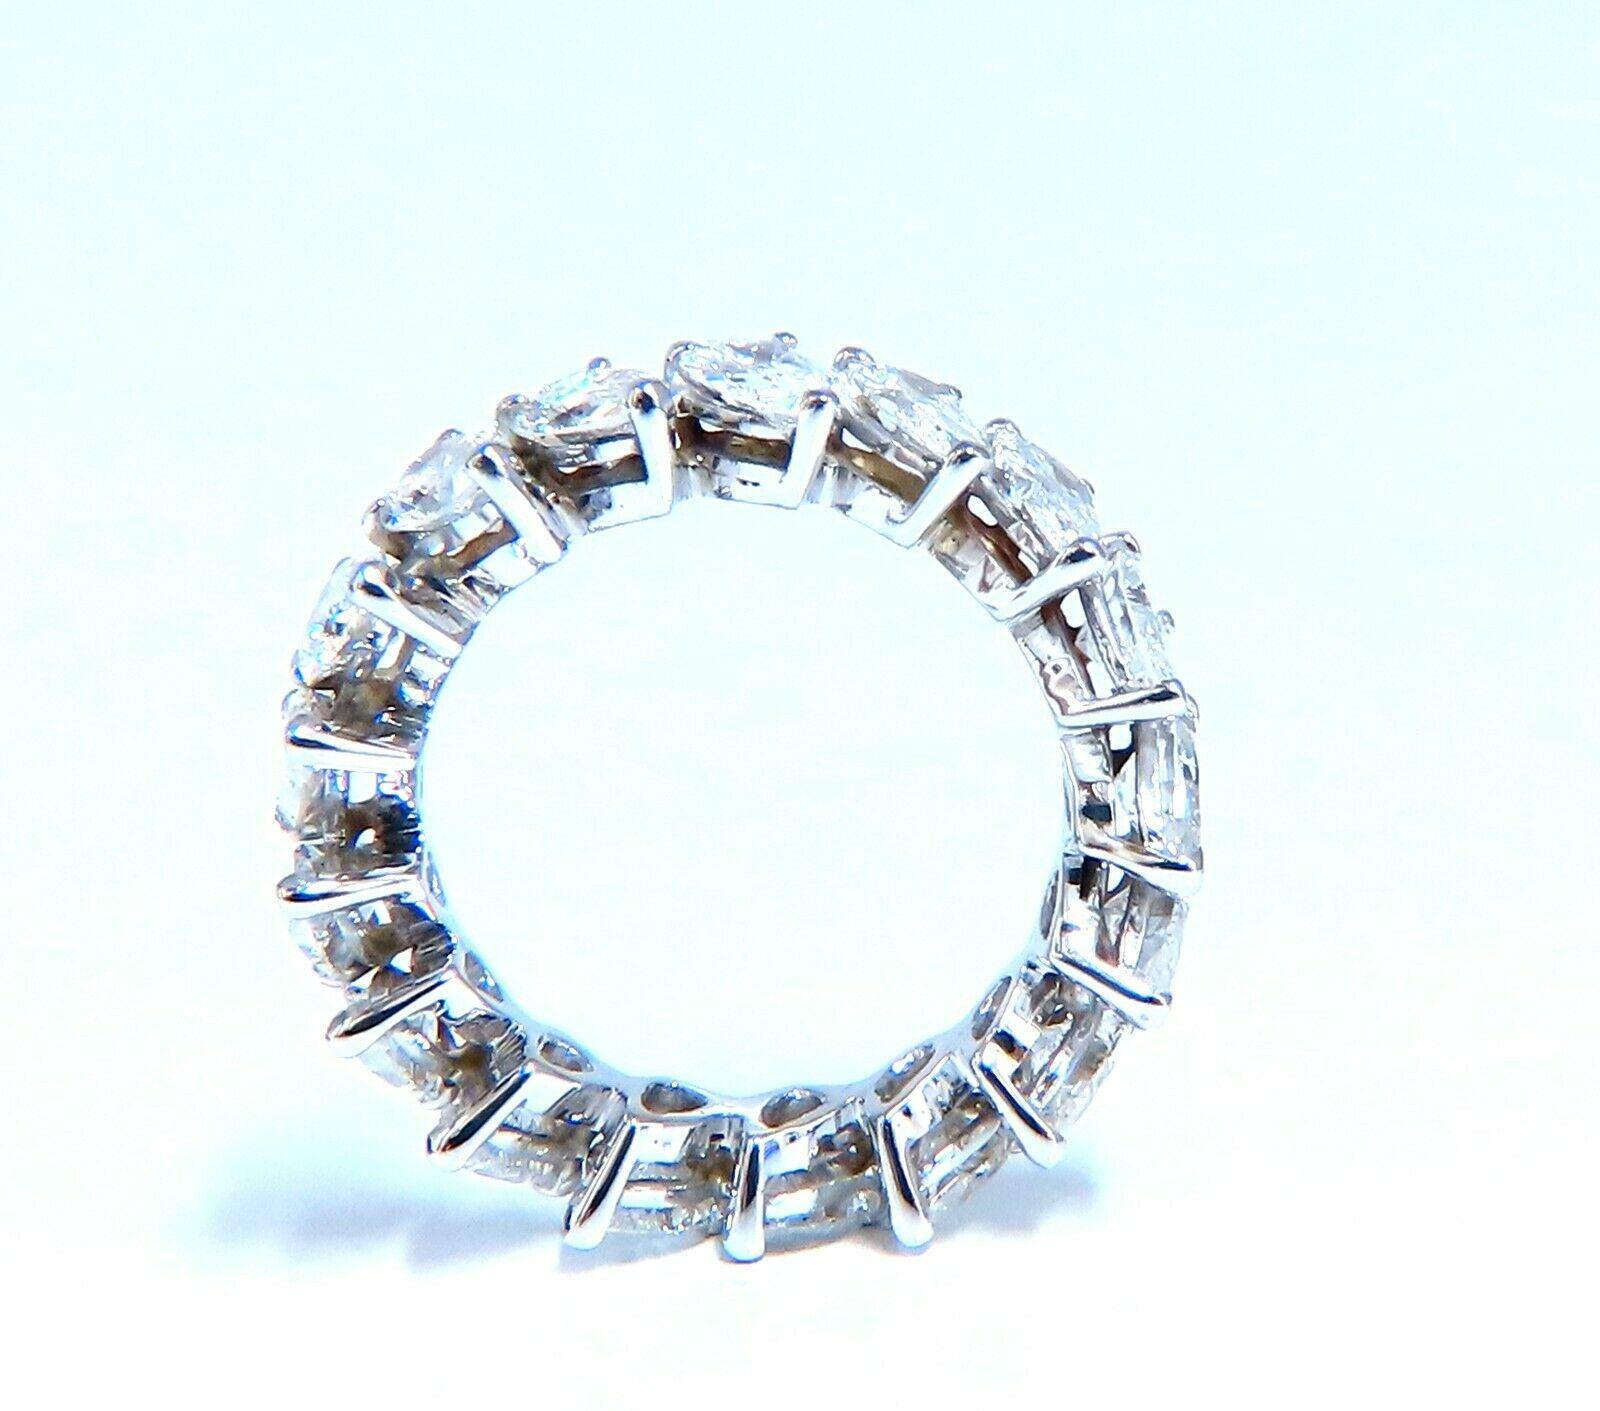 5ct. Natural Diamonds eternity band 
Pear, Brilliant Cuts

G color 

Vs-2 clarity


Raised Prong Set

3.9 grams

5.2mm wide 

3.5mm depth

Size 6.25 and may not resize.


14kt white gold
$20,000 Appraisal Certificate to accompany